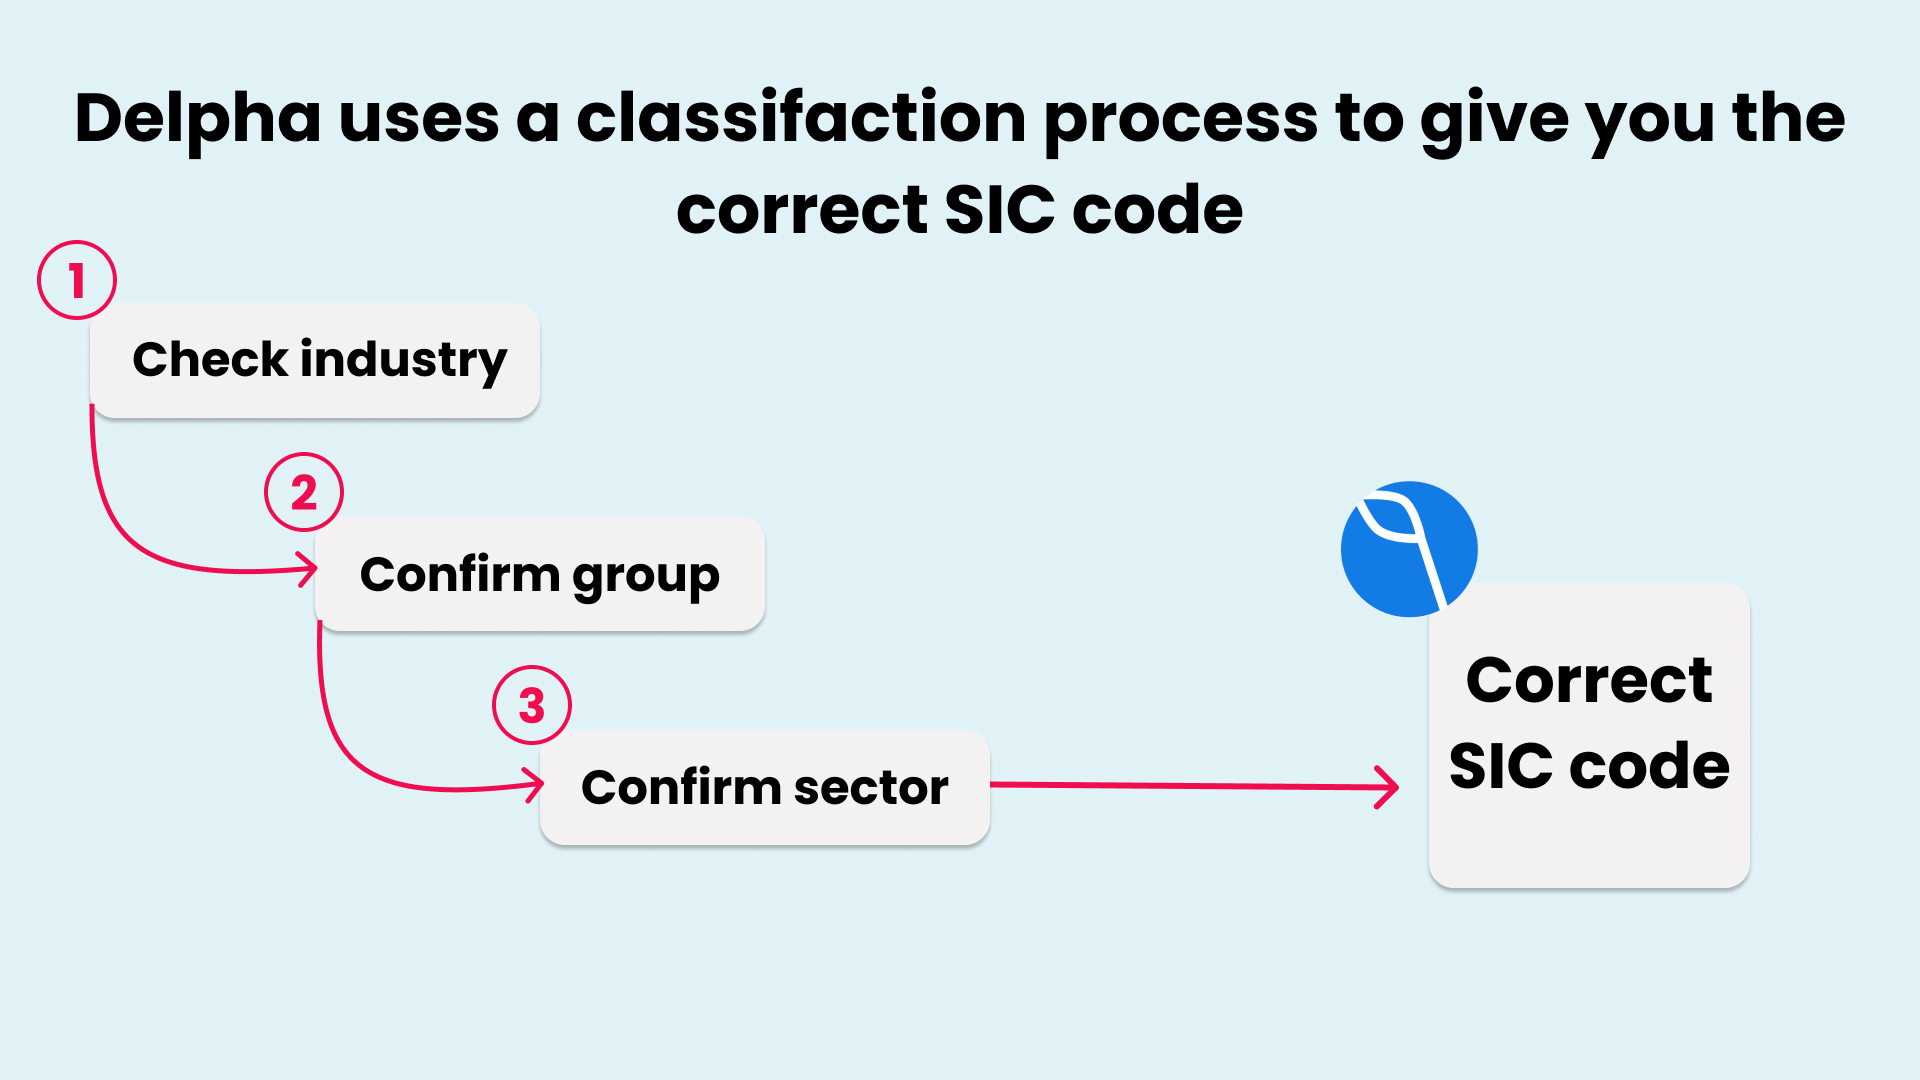 Delpha is able to produce the correct SIC code by adopting the classification rubric created by the Standard Industrial Classification system. Delpha guides the user through these couple steps to produce the correct code.